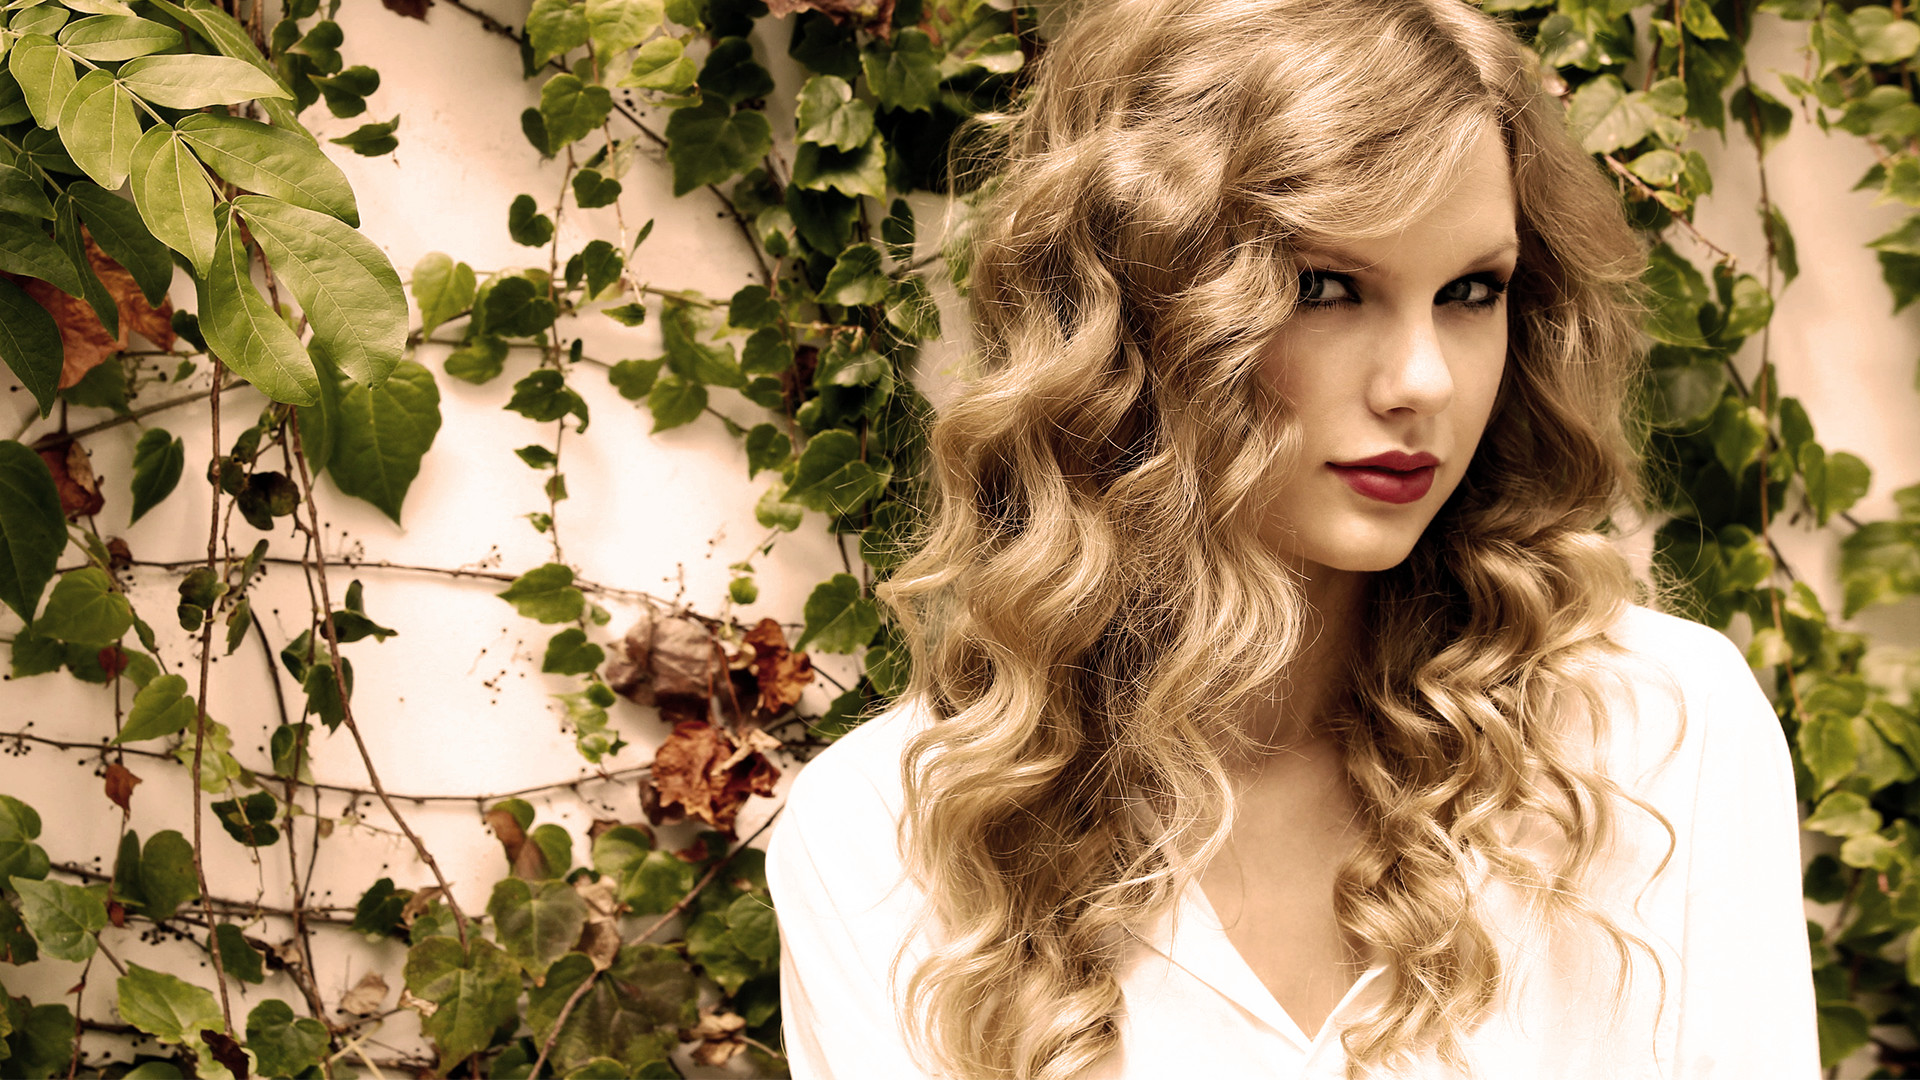 1920x1080 Download the following Taylor Swift Wallpaper 47637 by clicking the orange  button positioned underneath the "